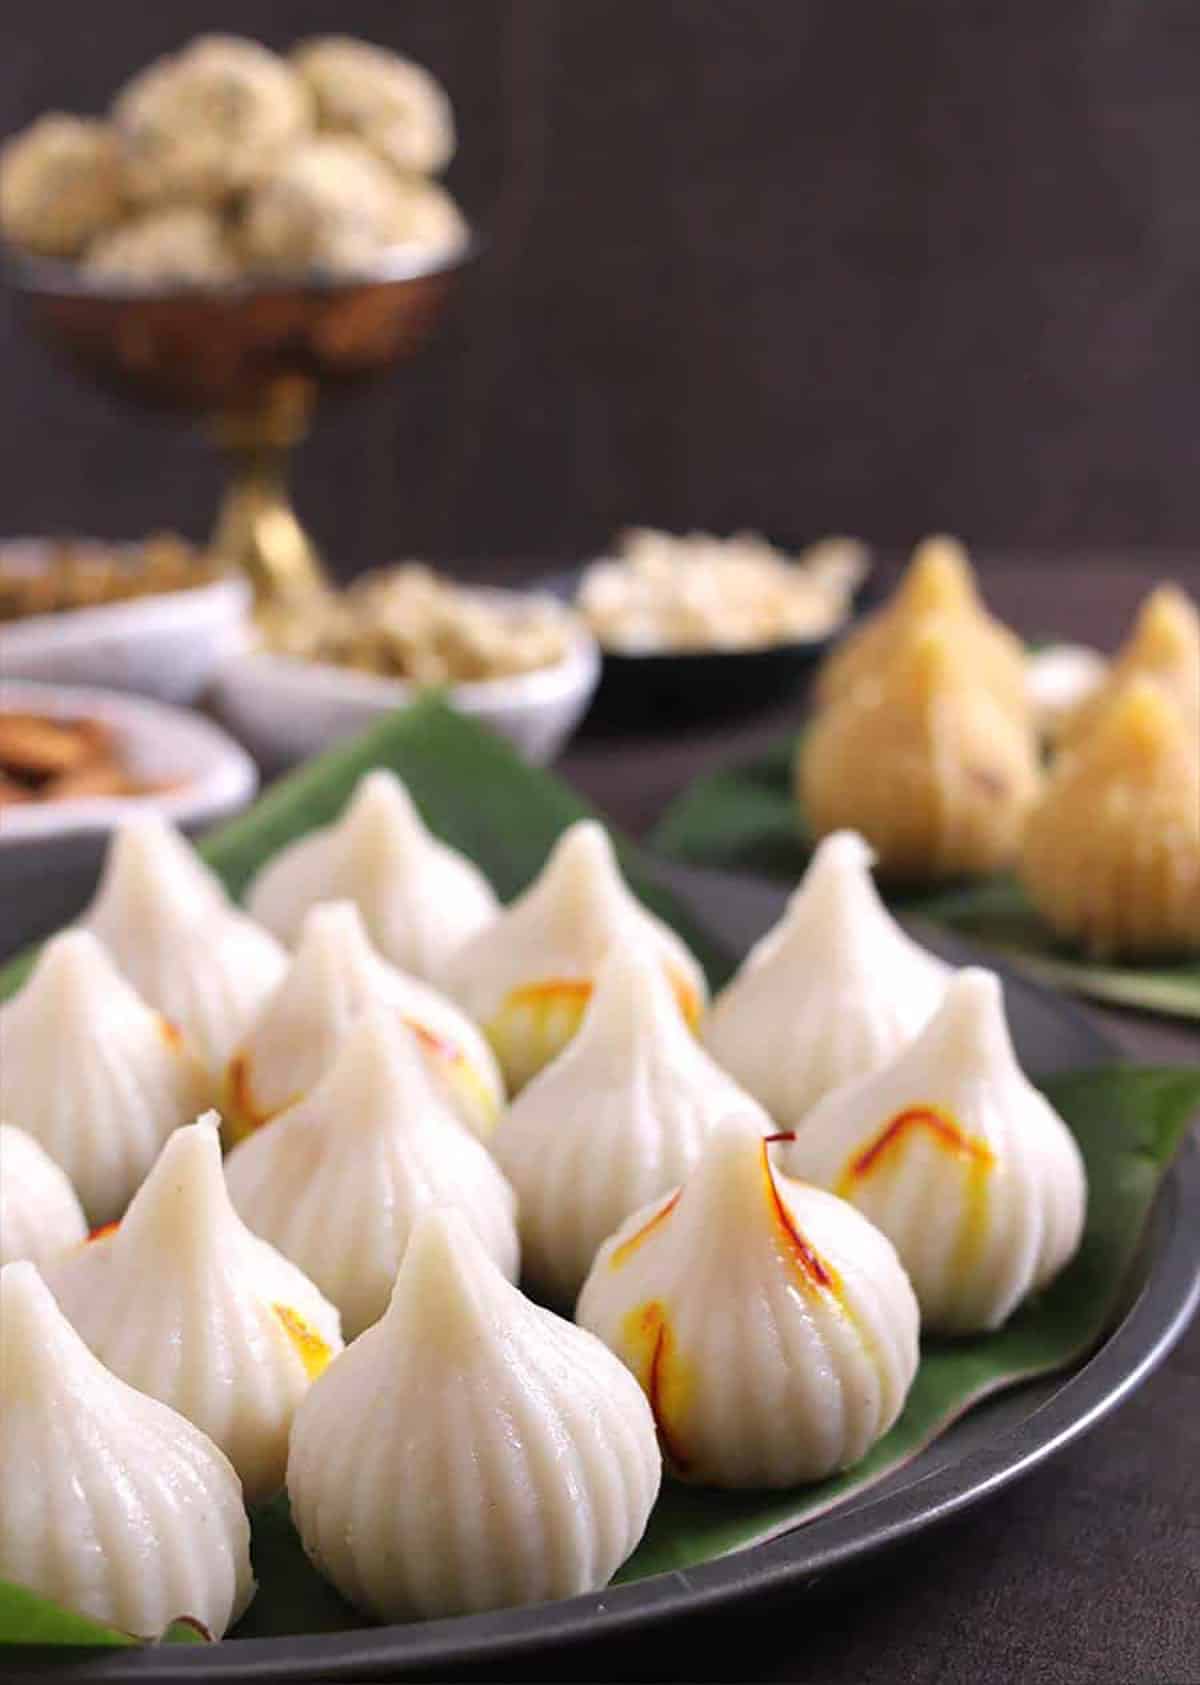 Steamed modak served on a black plate lined with banana leaf.